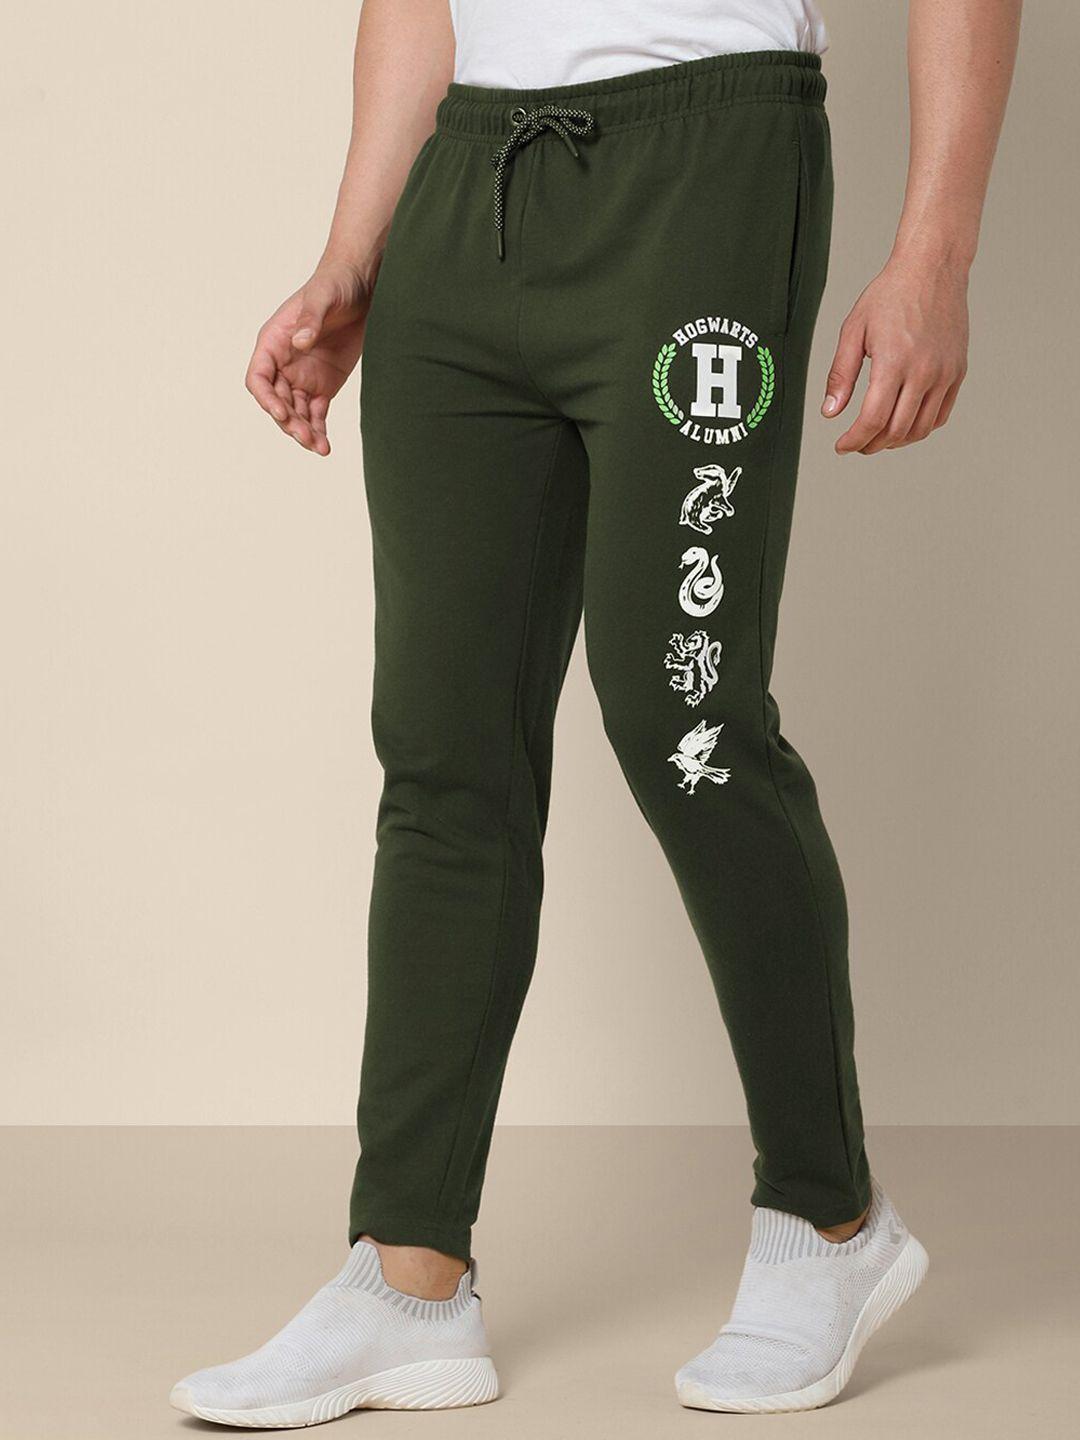 free-authority-men-olive-green-harry-potter-printed-terry-cotton-track-pants